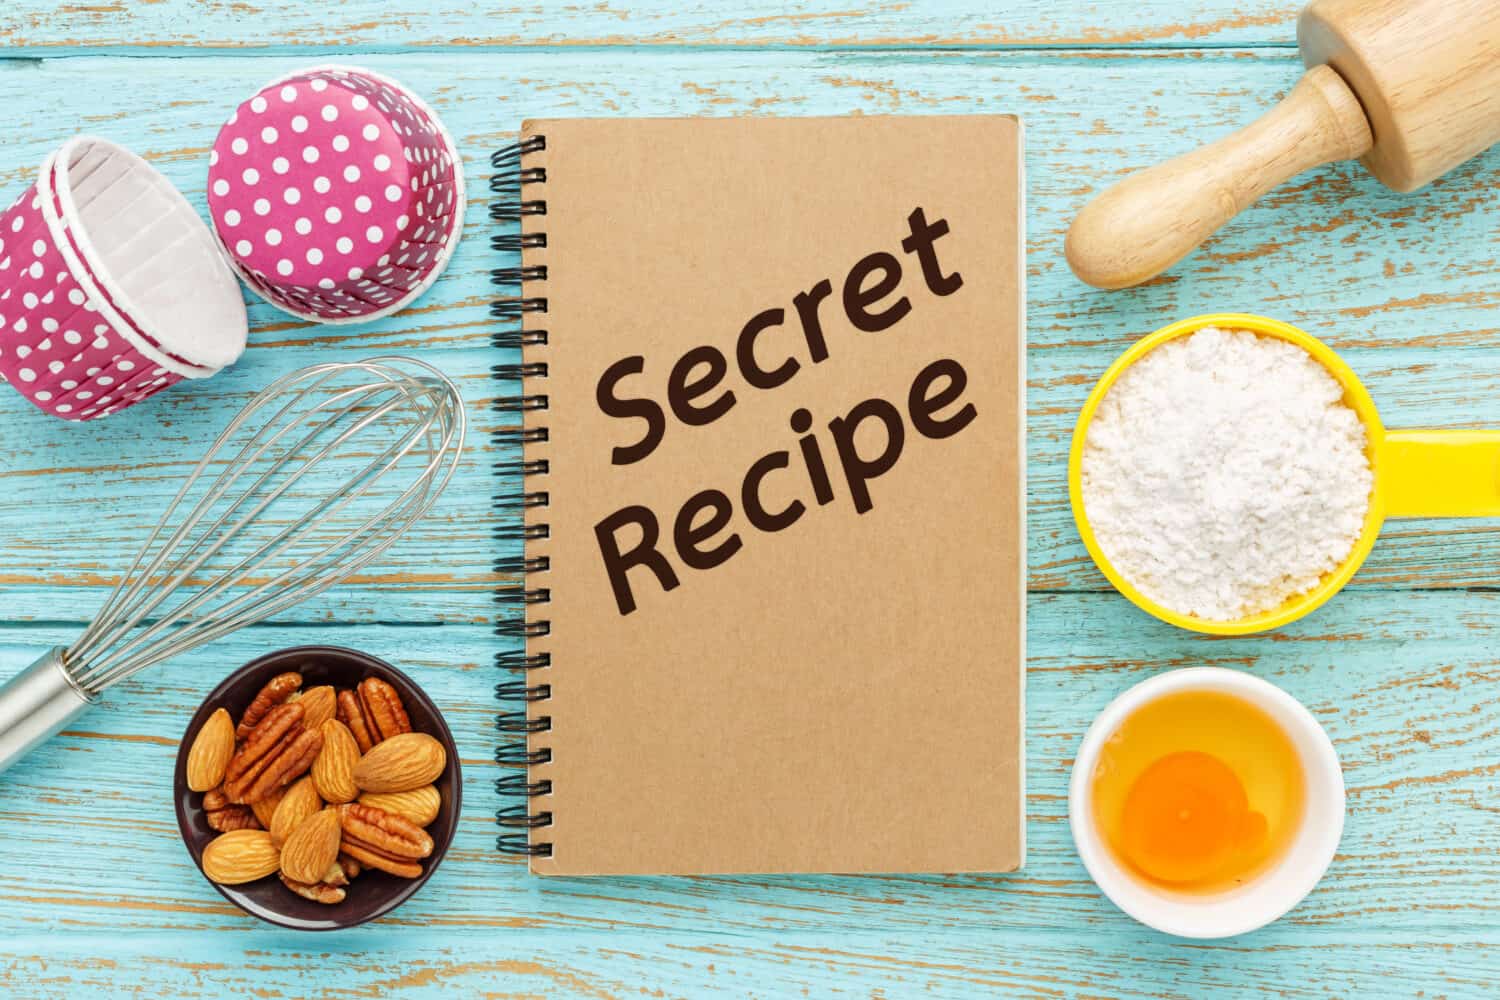 Baking secret recipe book with baking ingredients on wood table